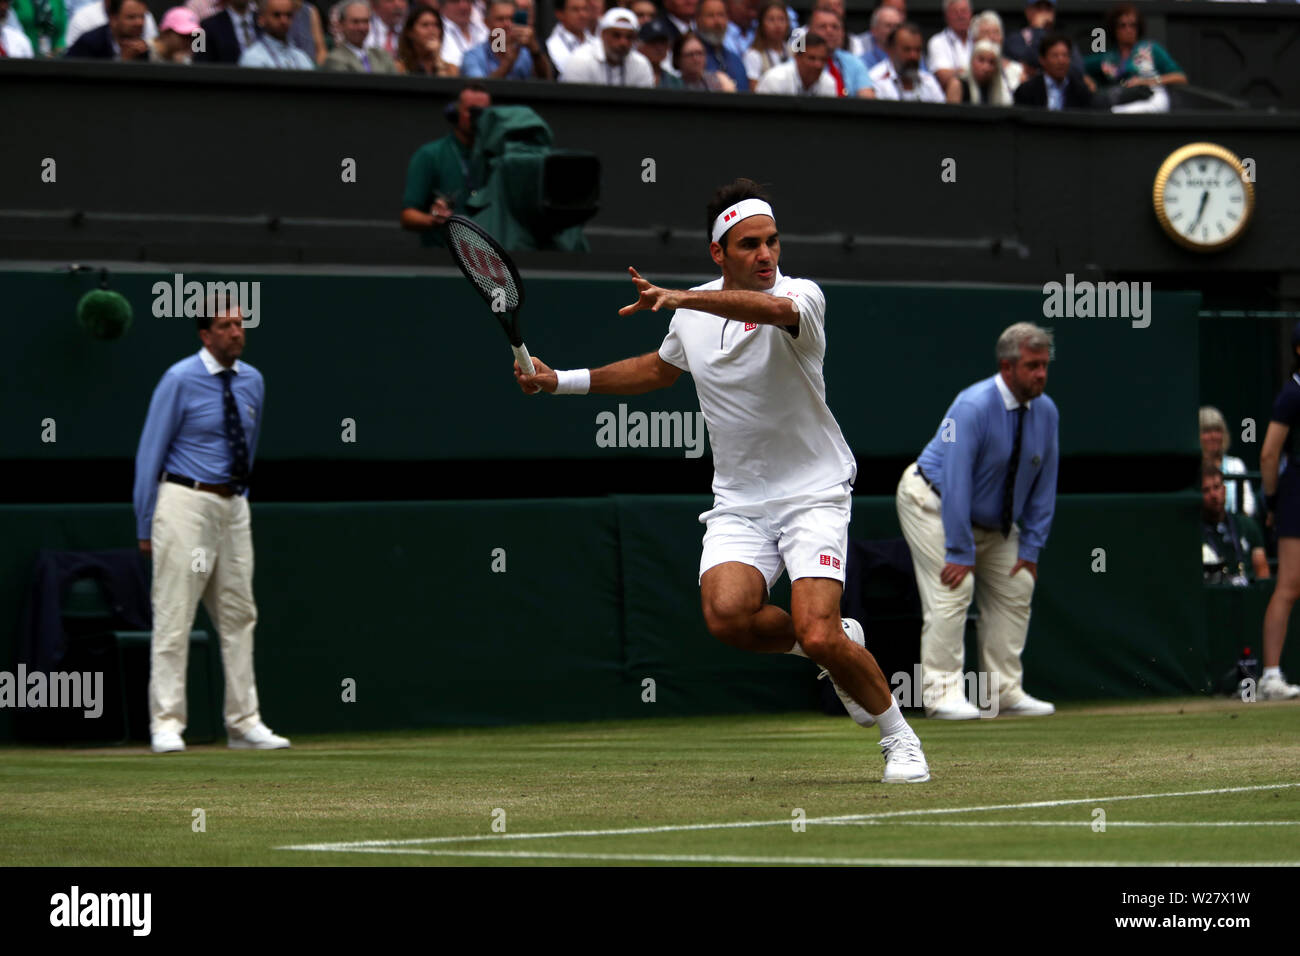 Wimbledon, 6 July 2019 - Roger Federer during his third round match against Lucas Pouille of France today at Wimbledon. Stock Photo